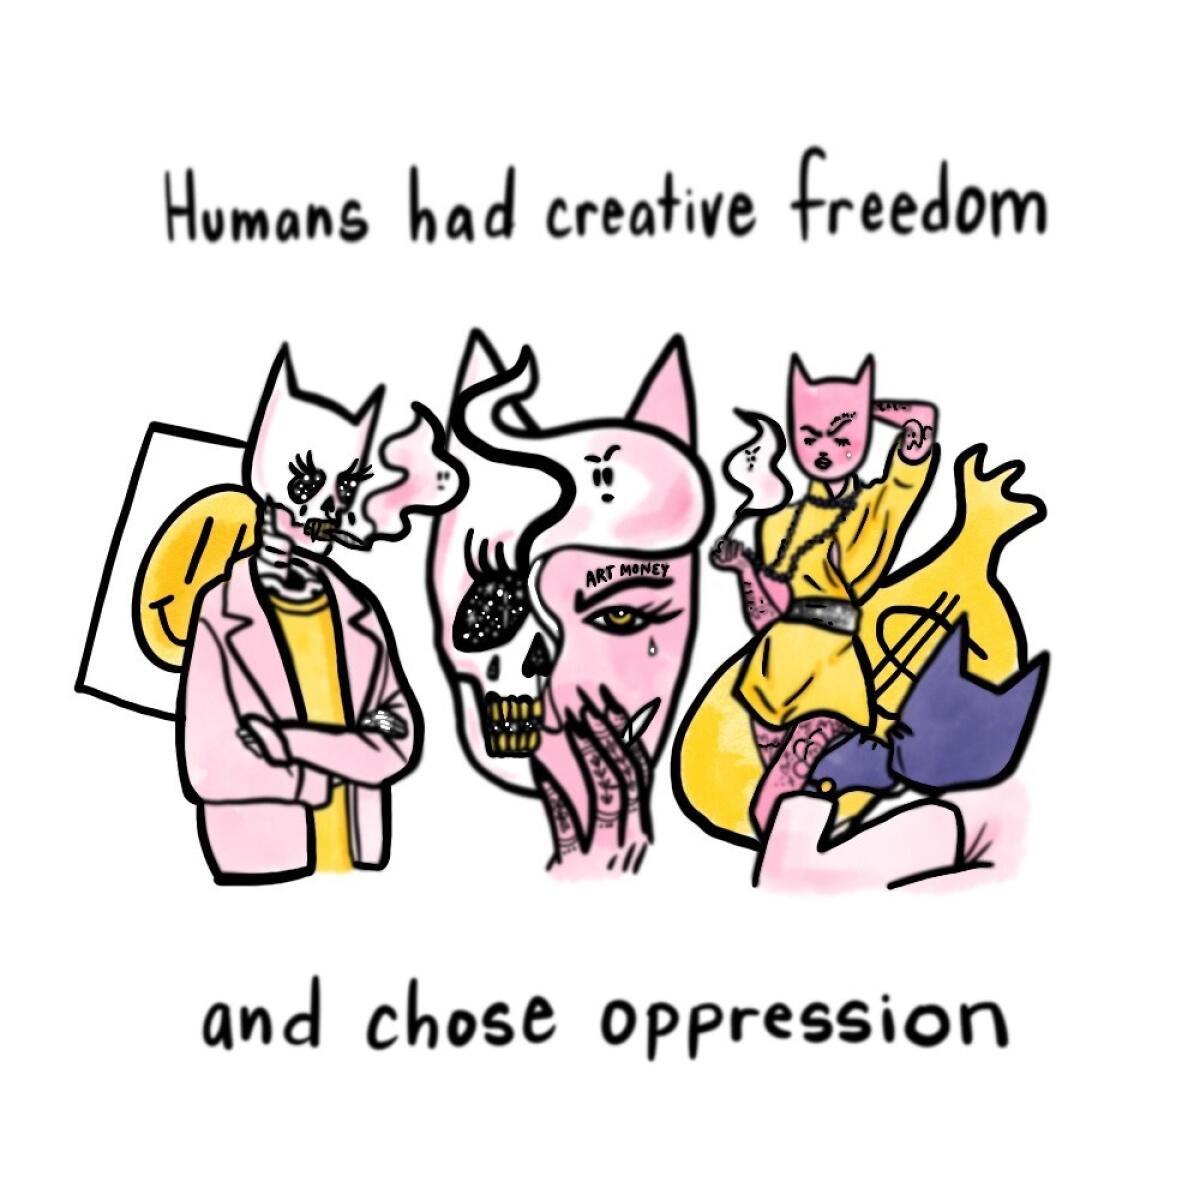 An illustration with the words "Humans had creative freedom and chose oppression"